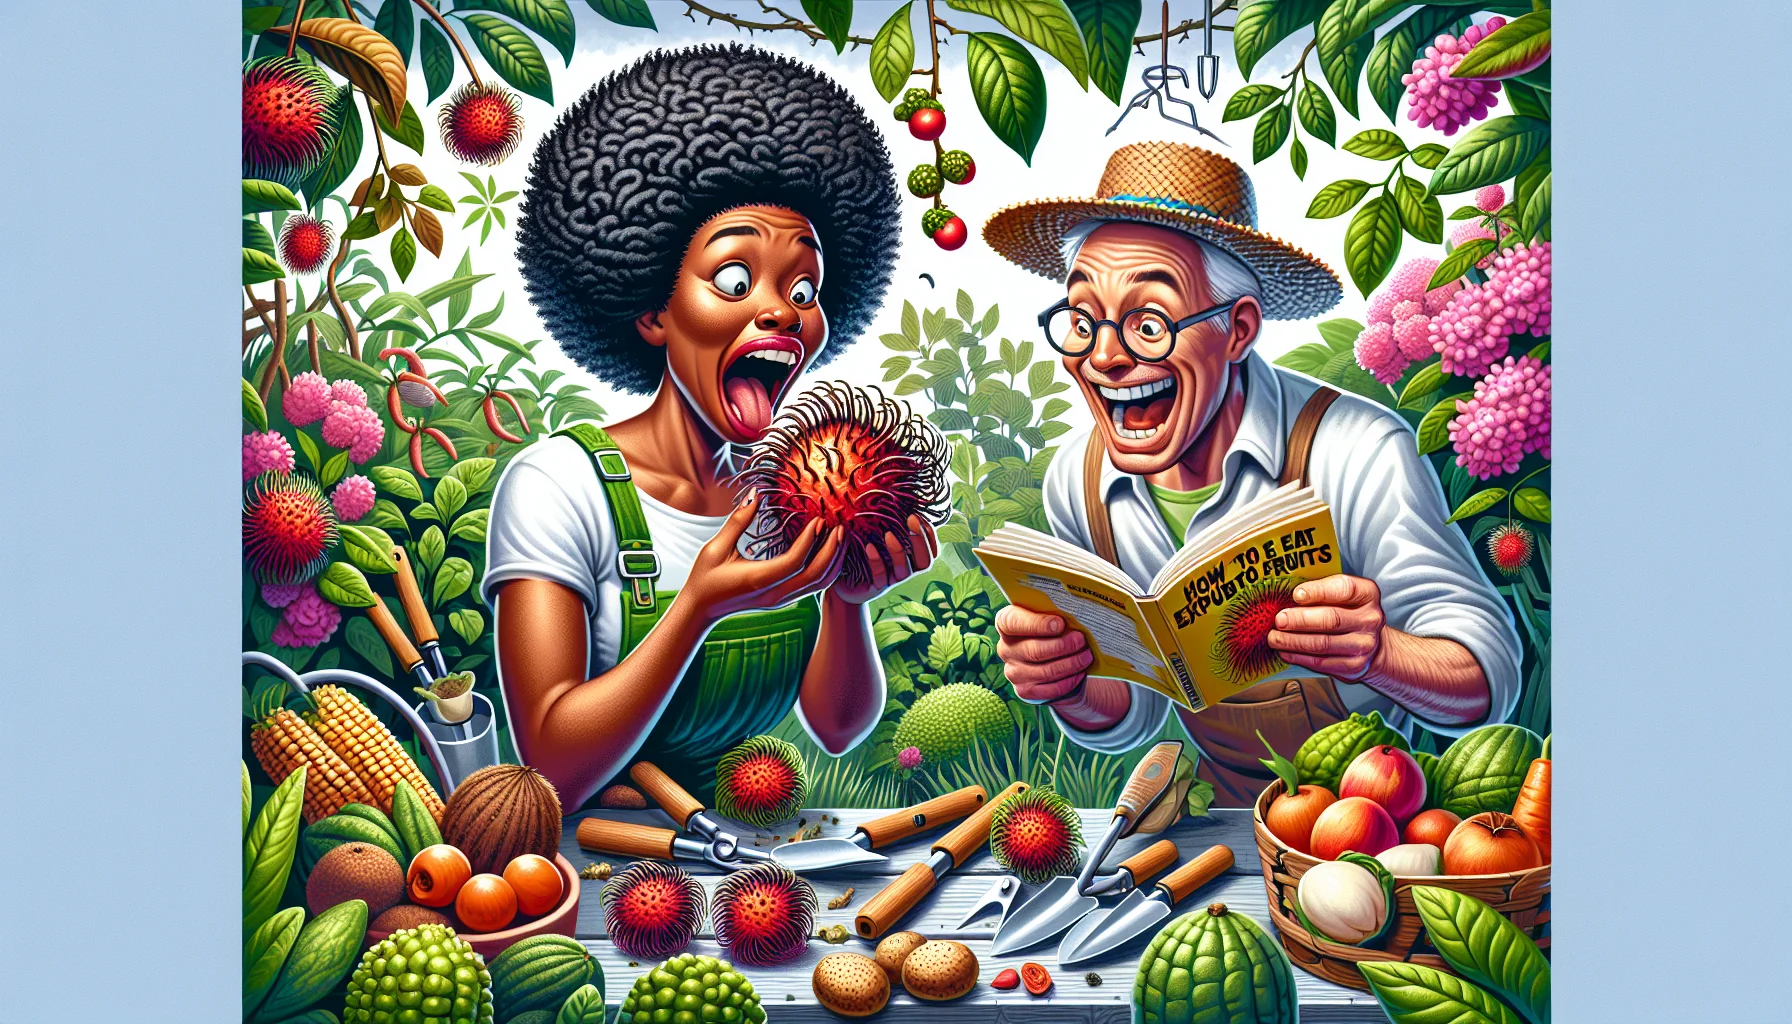 Create a detailed image that represents a humorous scene encouraging an appreciation for gardening. Show a Black woman with short curly hair, in gardening attire, while trying to eat a rambutan. She looks hilariously surprised at the weird fruit she has encountered. Her gardening tools are scattered around her and she is surrounded by various lush, blooming plants. A white man, wearing glasses and a straw hat, is laughing while reading a 'How to Eat Exotic Fruits' manual. In the background, various types of fruits and vegetables are growing healthier and abundant, emphasizing the joy of home gardening.